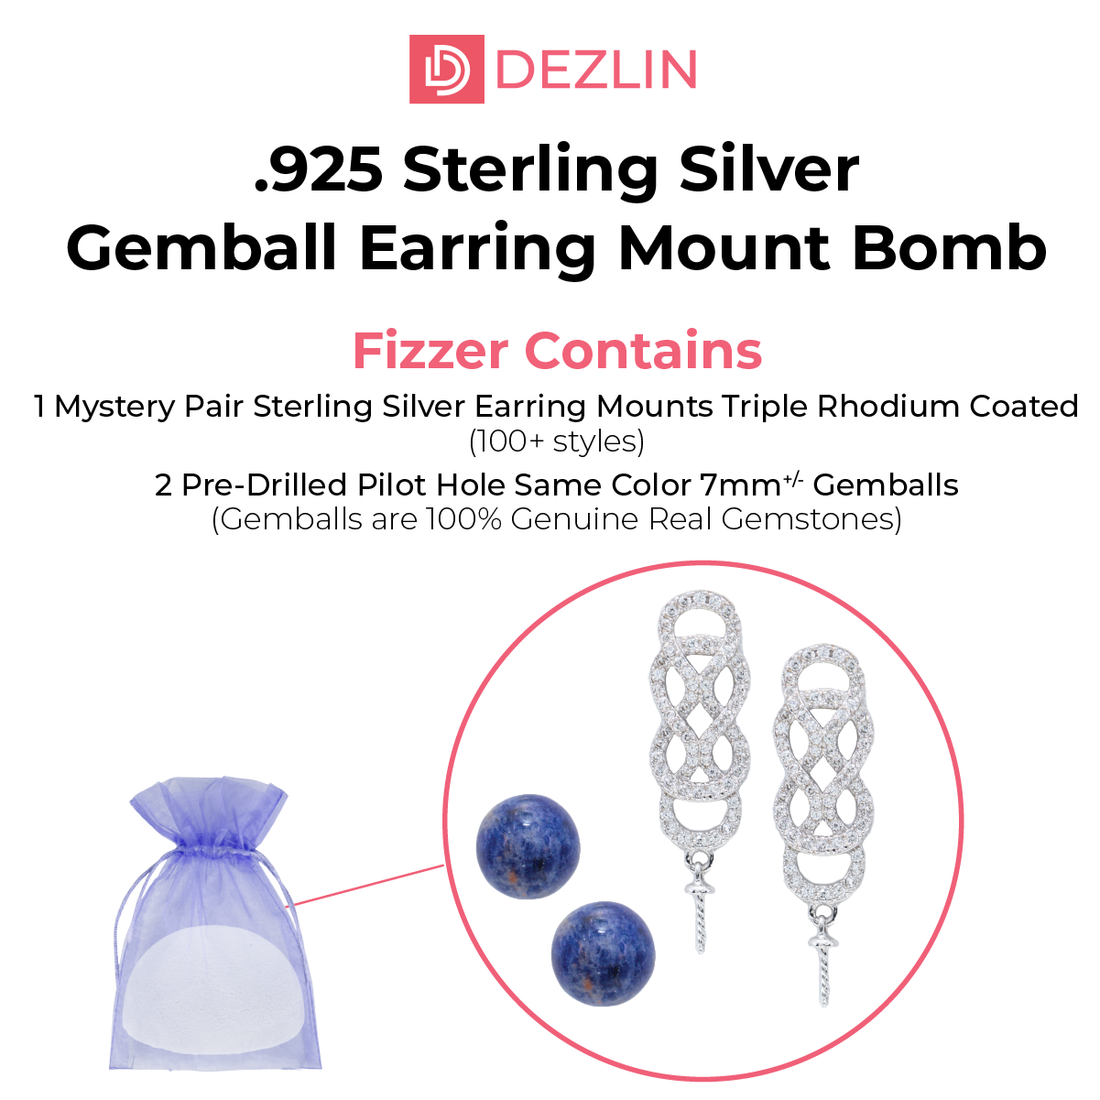 Gemball Bomb Earring Mount Sterling Silver with Rhodium Coating